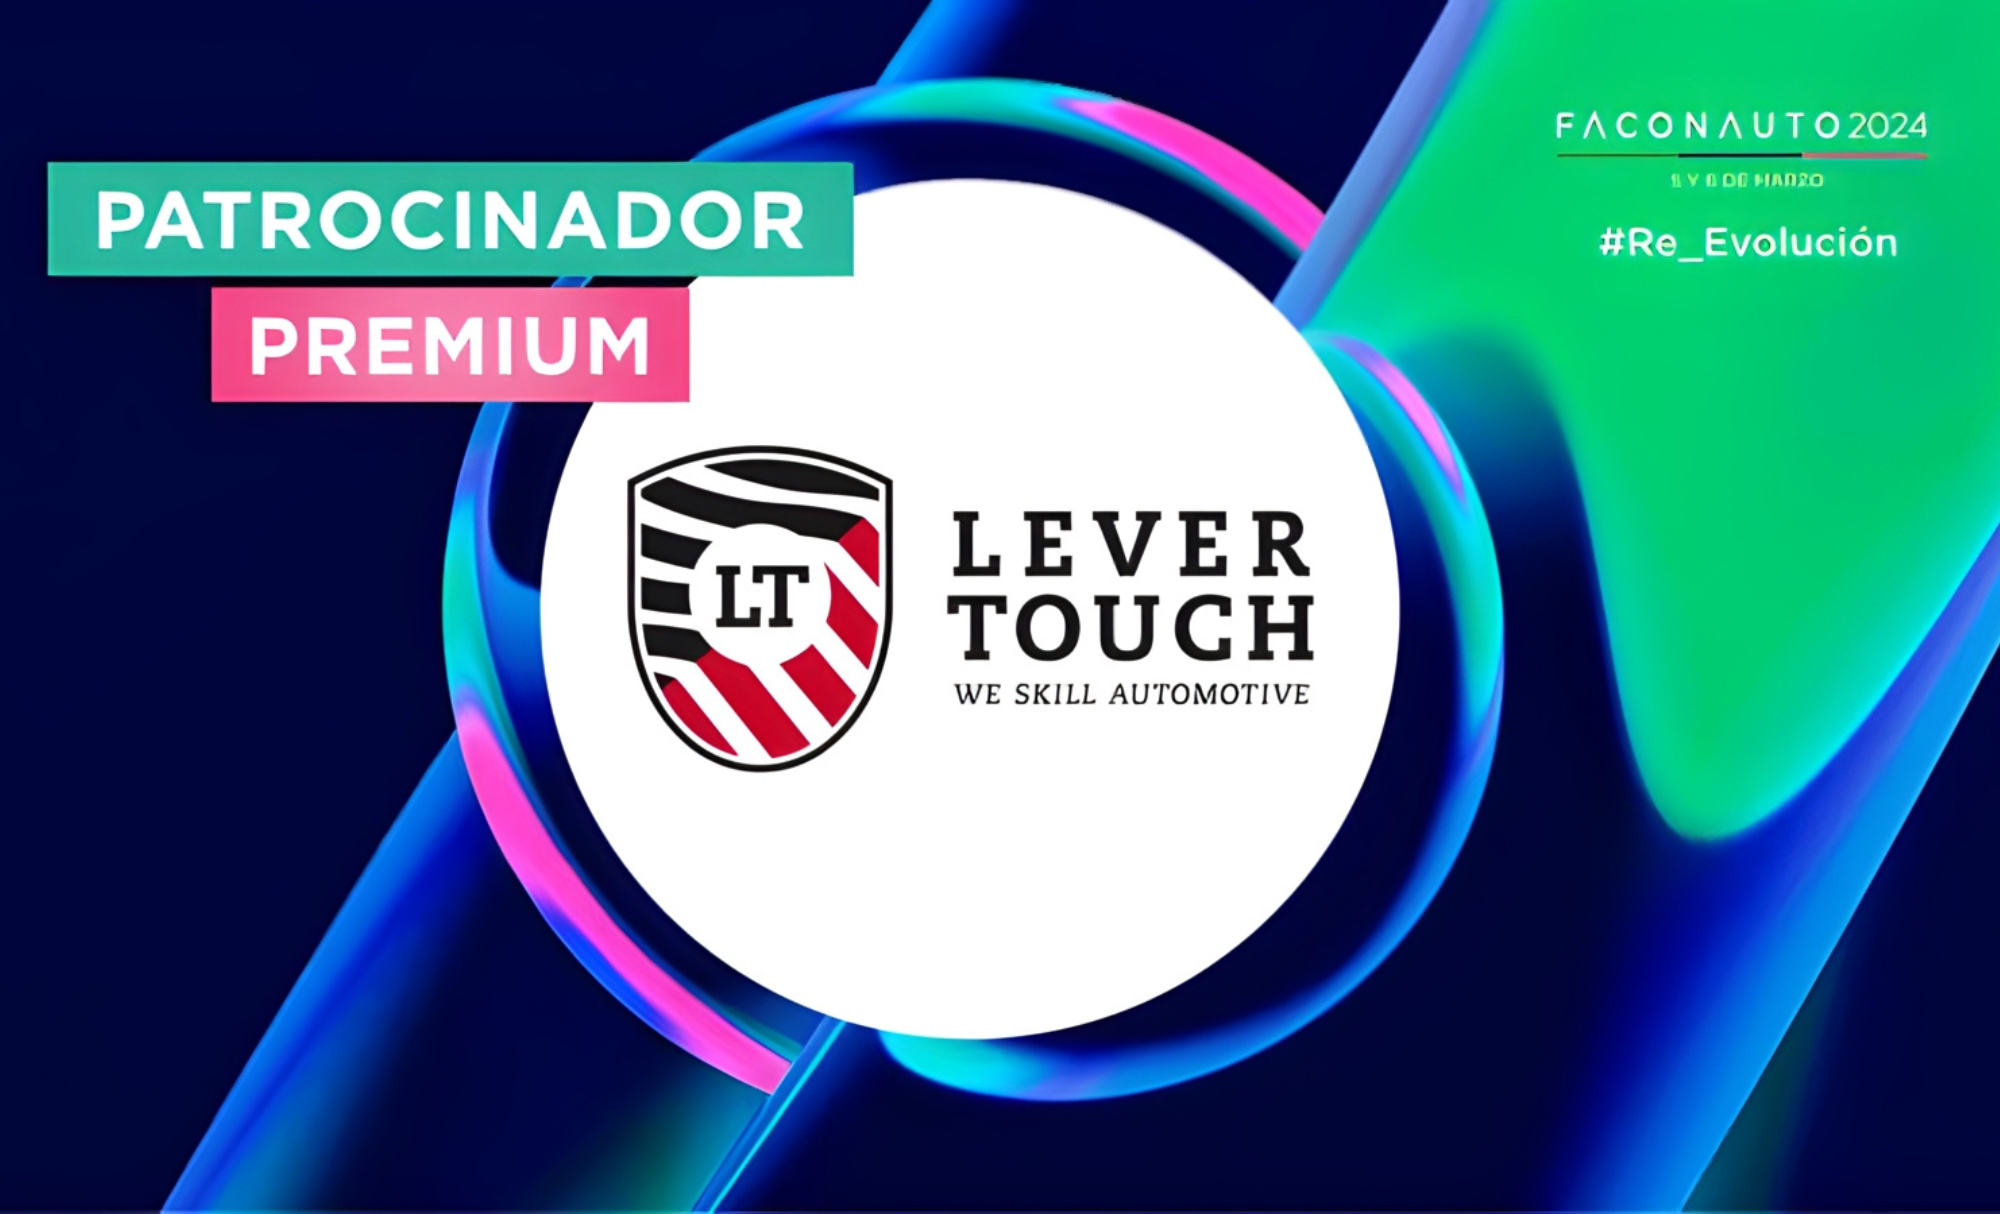 Lever Touch, premium sponsor of Faconauto 2024: “We offer coverage to dealerships so they can respond promptly and provide high-quality services and assurances to their customers in case of a weather-related incident”